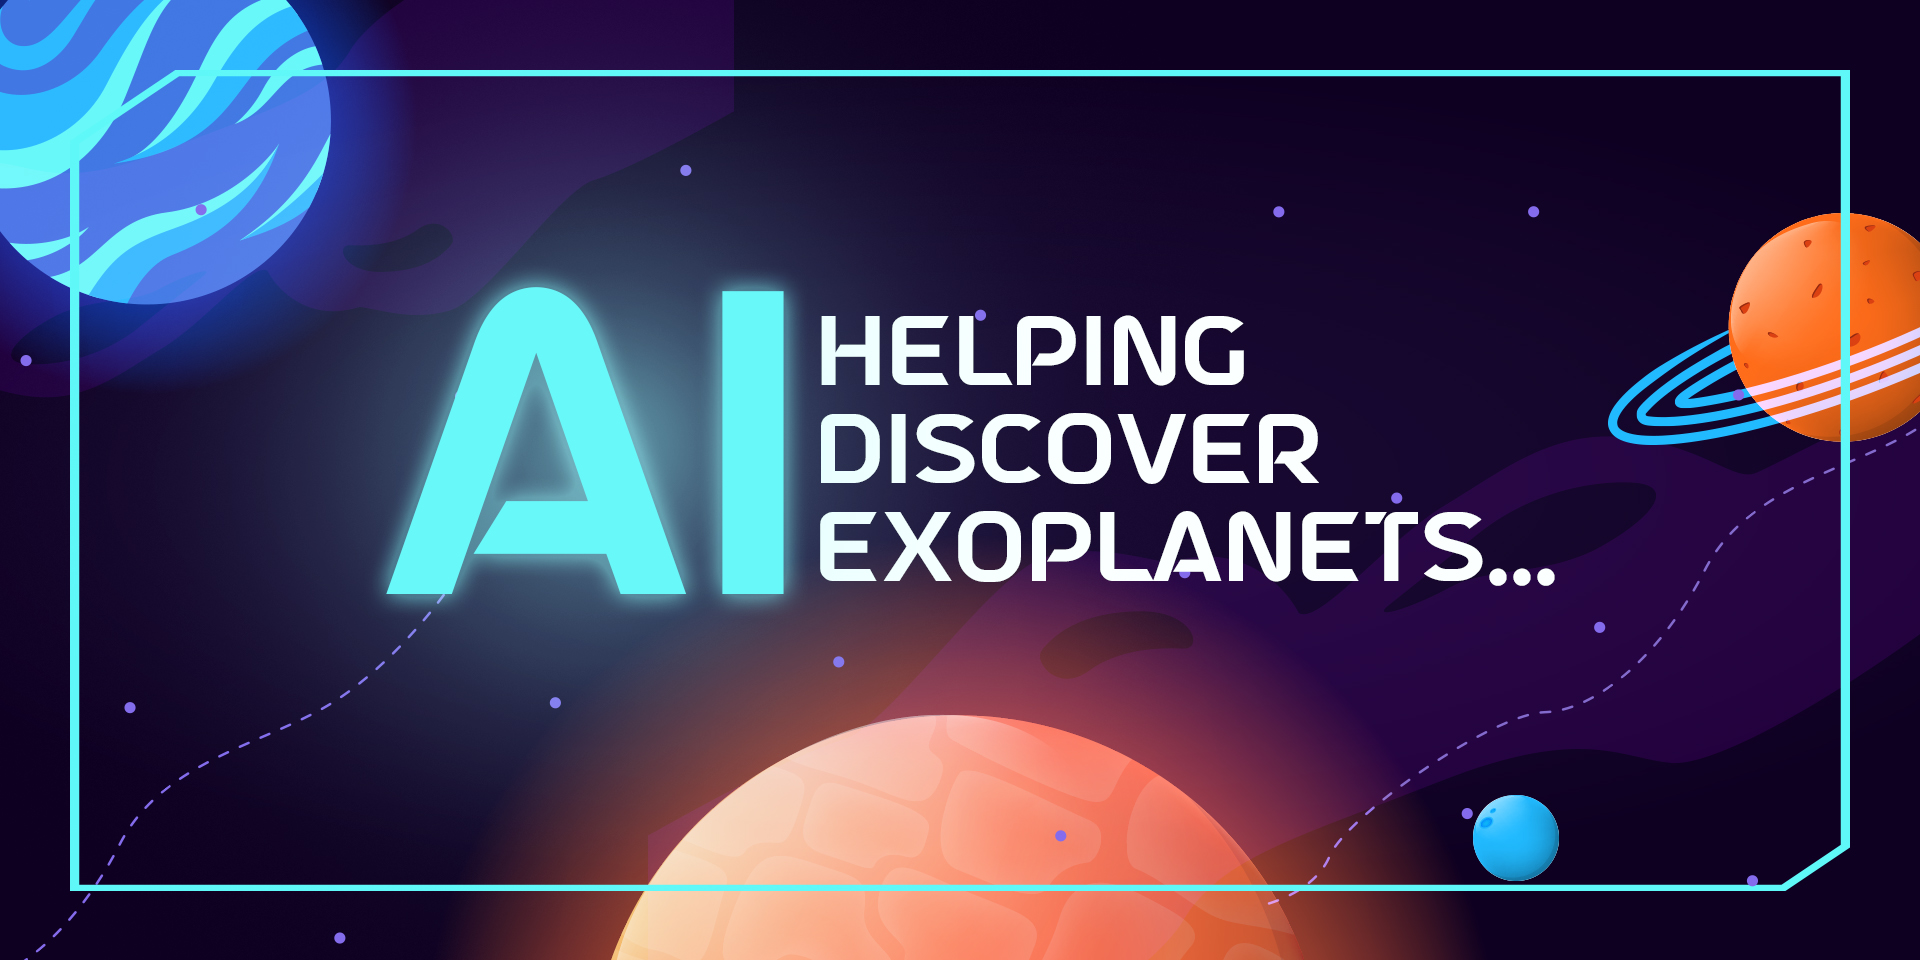 Detecting Exoplanets Made Easy by Using Artificial Intelligence